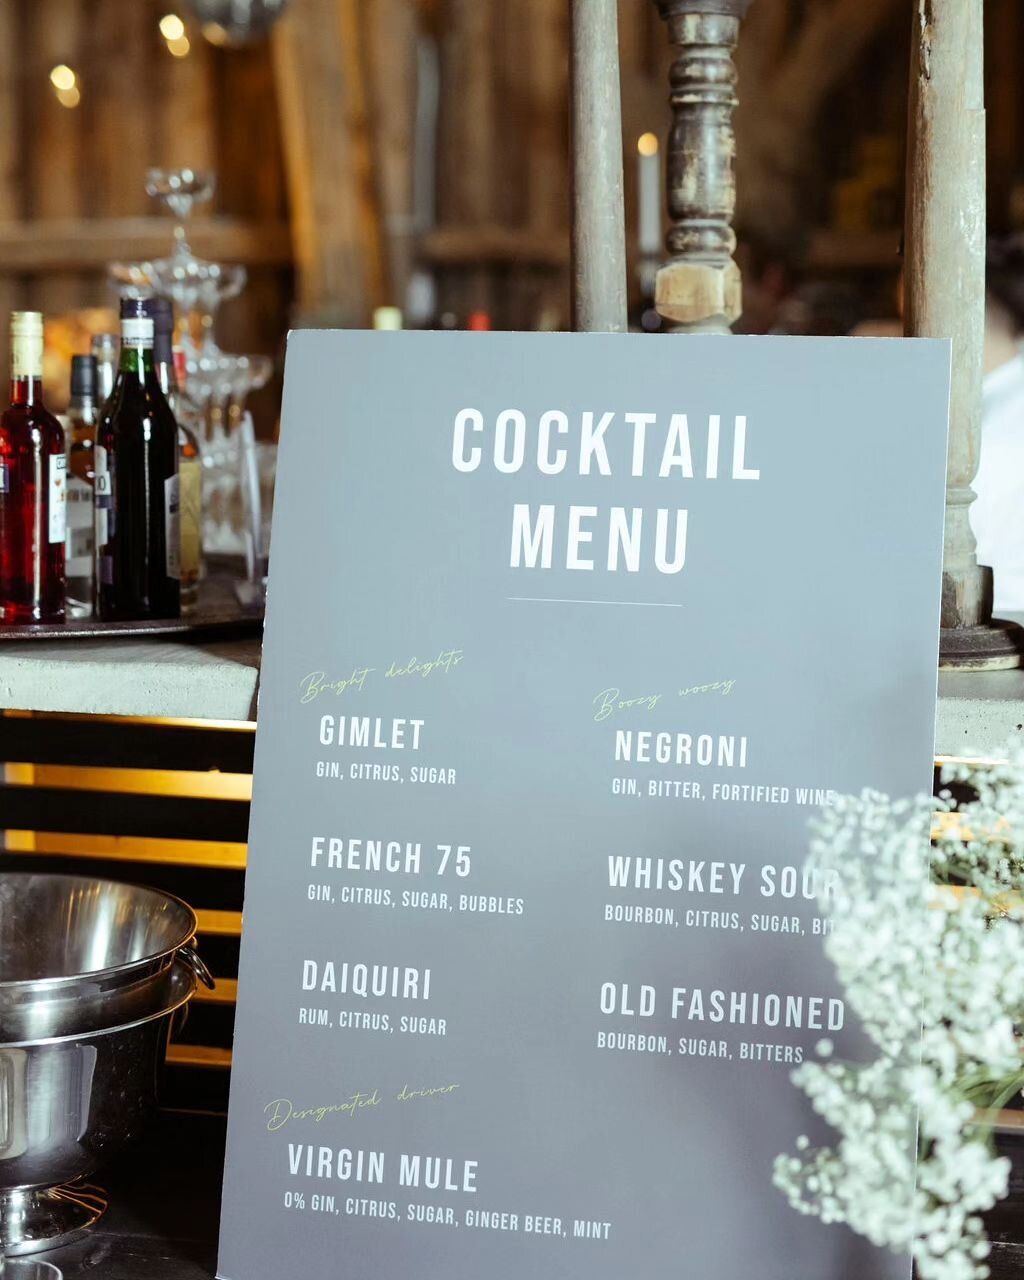 The greatest of the great.

Cocktail menu by Pontus and Rae.

Delicious drinks 🍸 were poured all night long at their intimate, edgy, and super awesome wedding at @hermanstorpsgarden